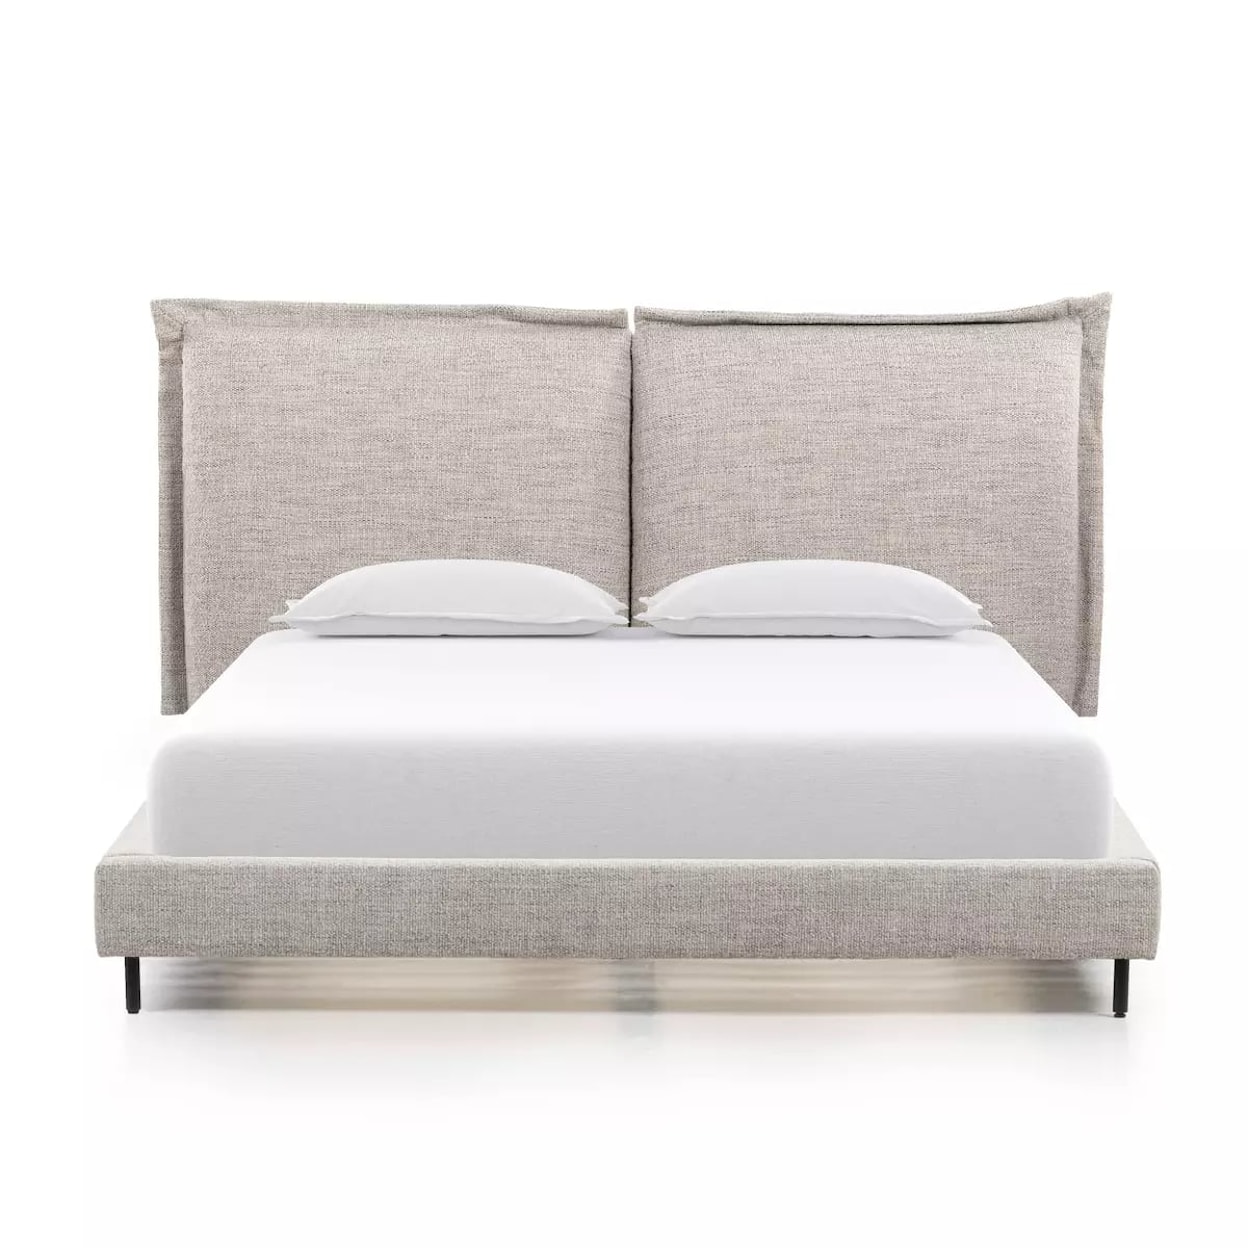 Four Hands Inwood King Bed 